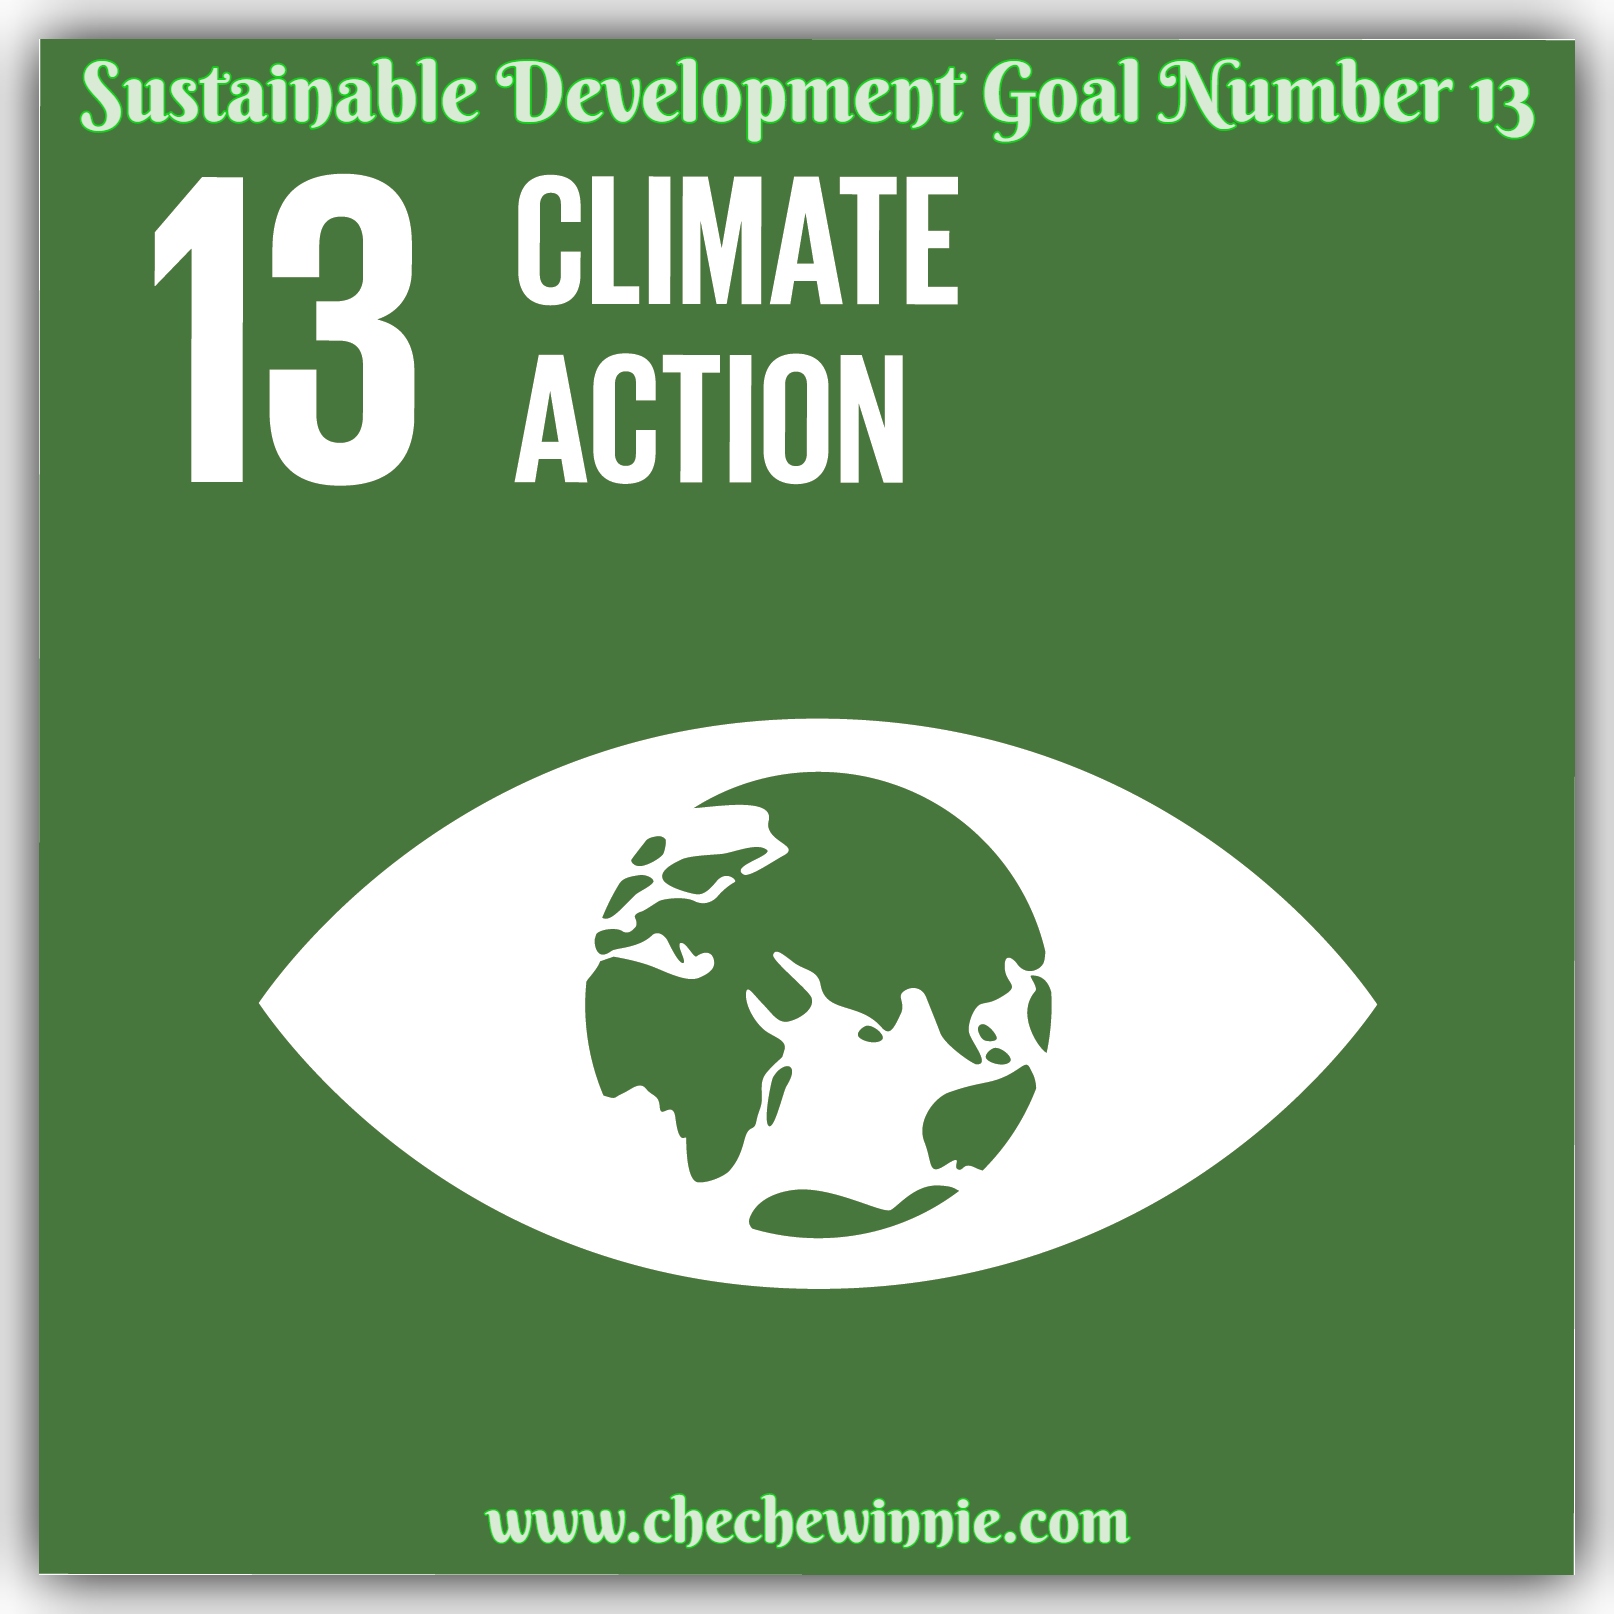 Sustainable Development Goal Number 13